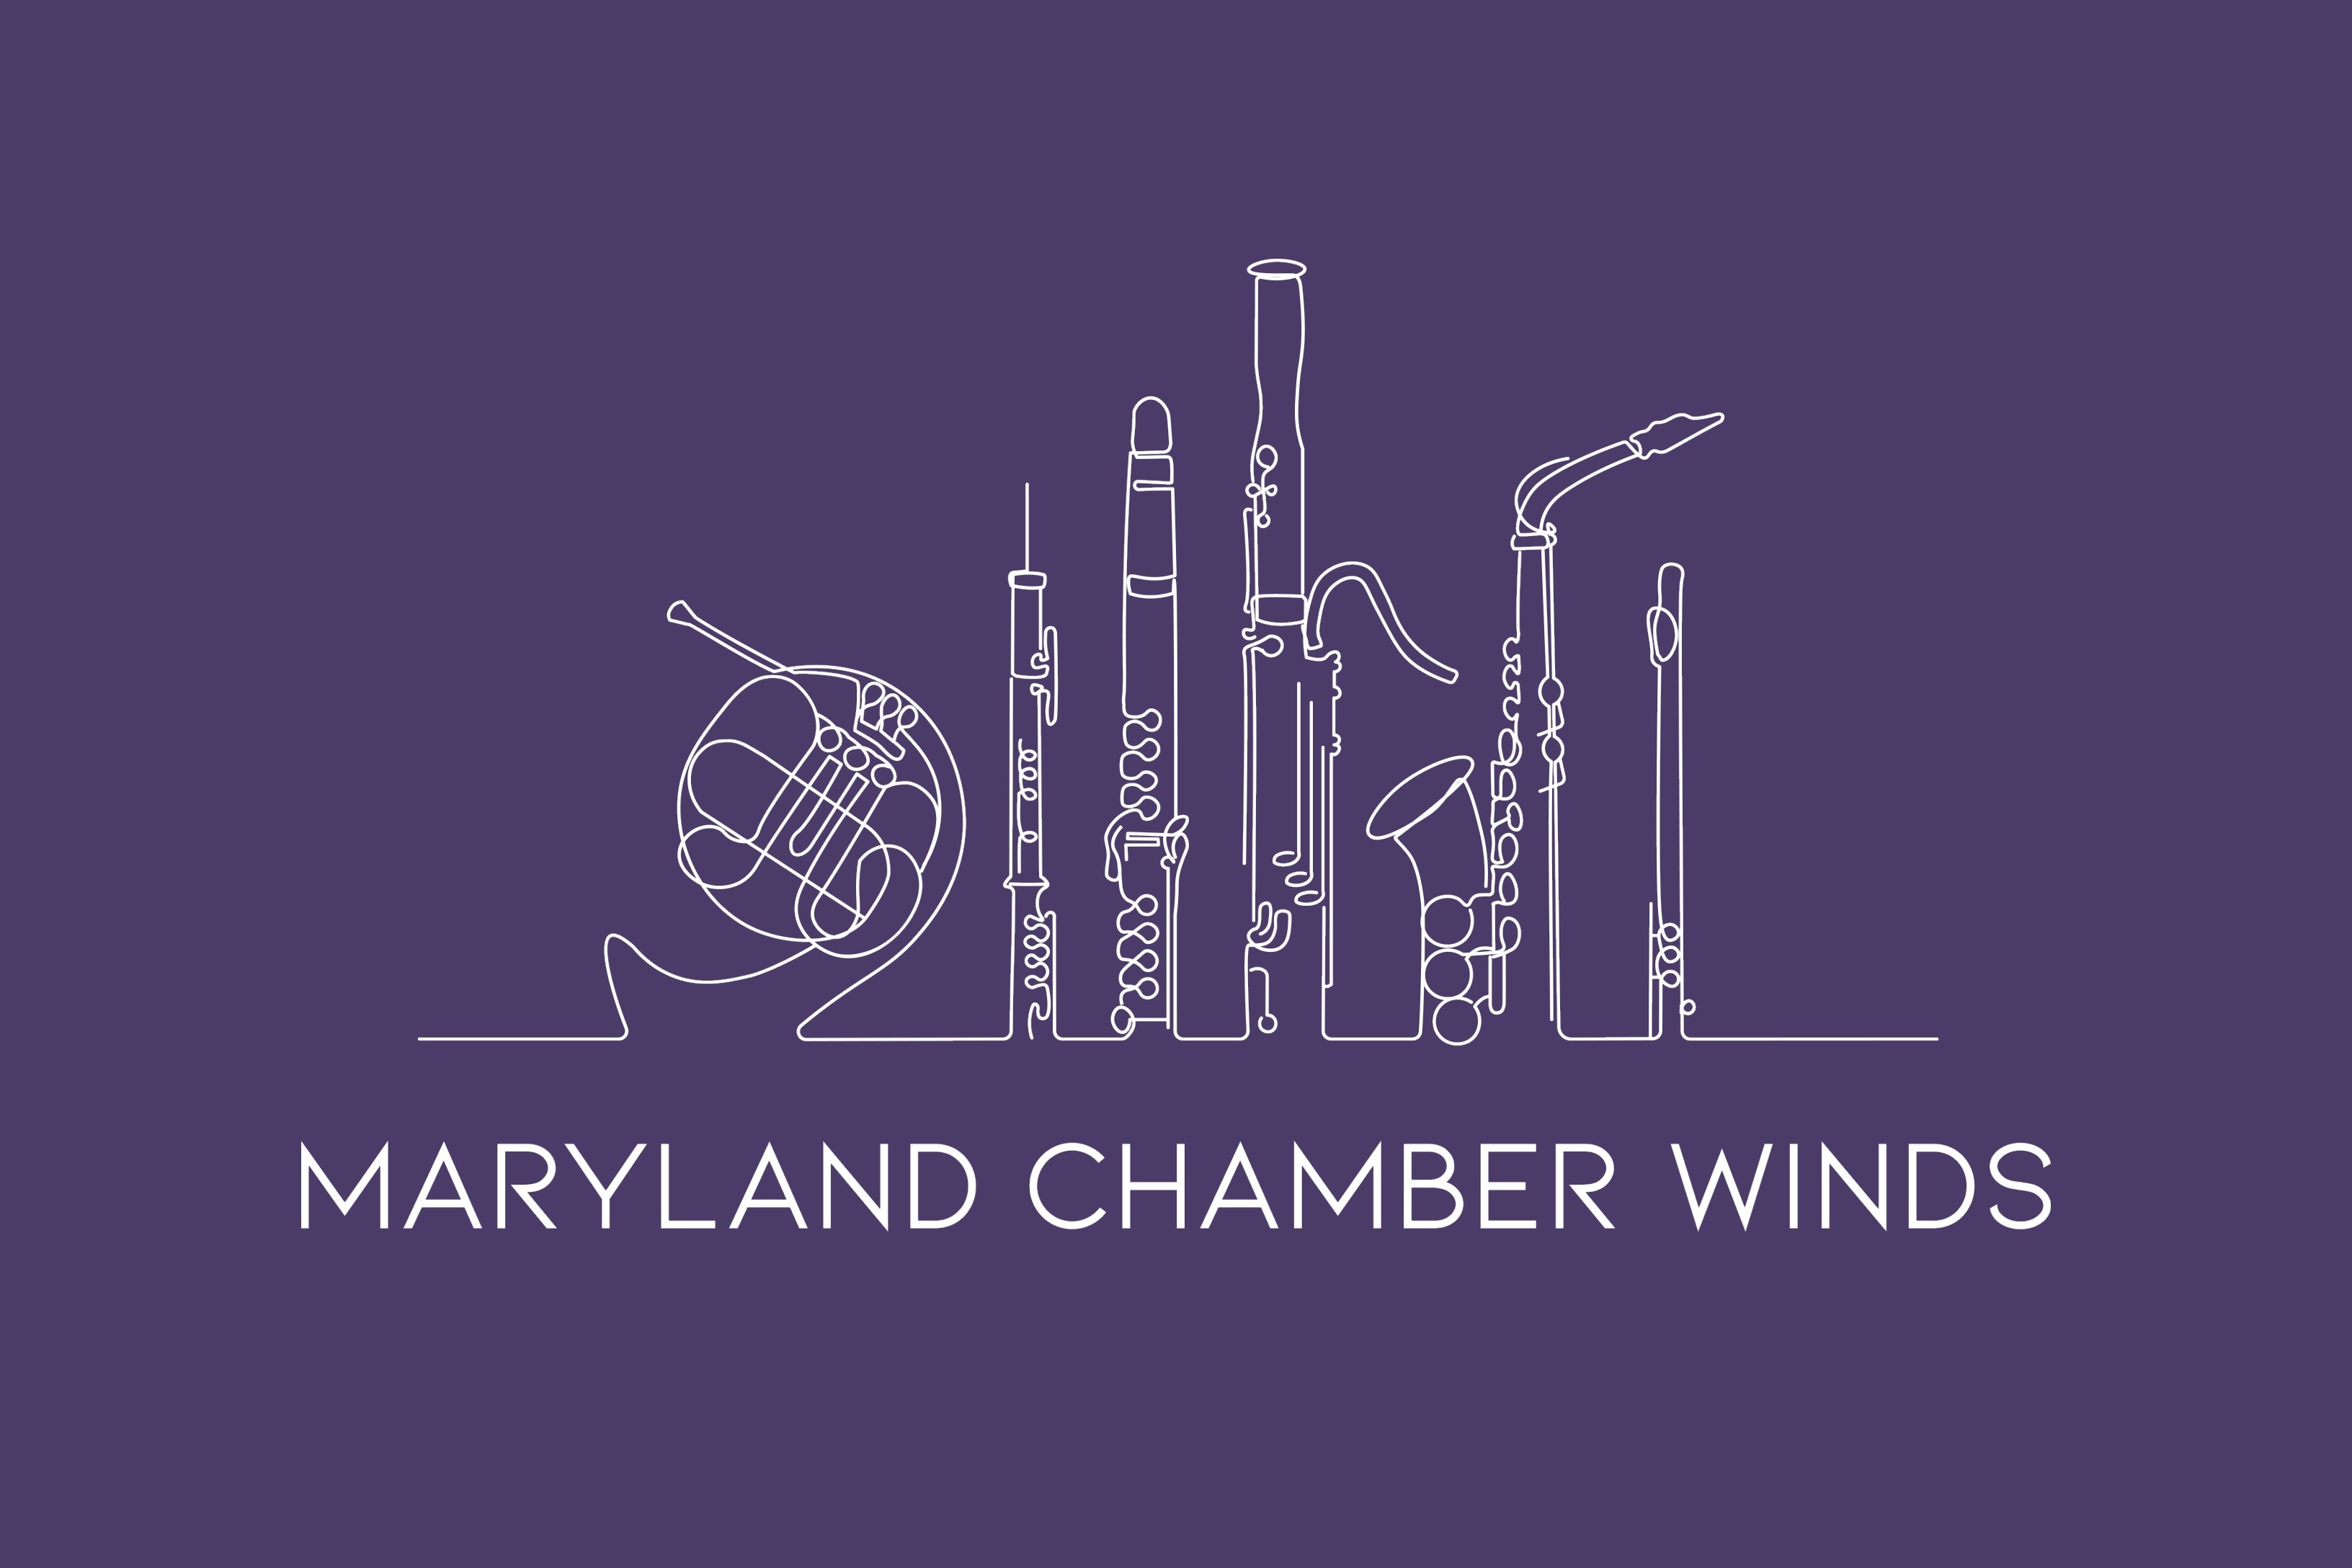 A purple background with Maryland Chamber Winds in white with a line drawing of wind instruments in white above.